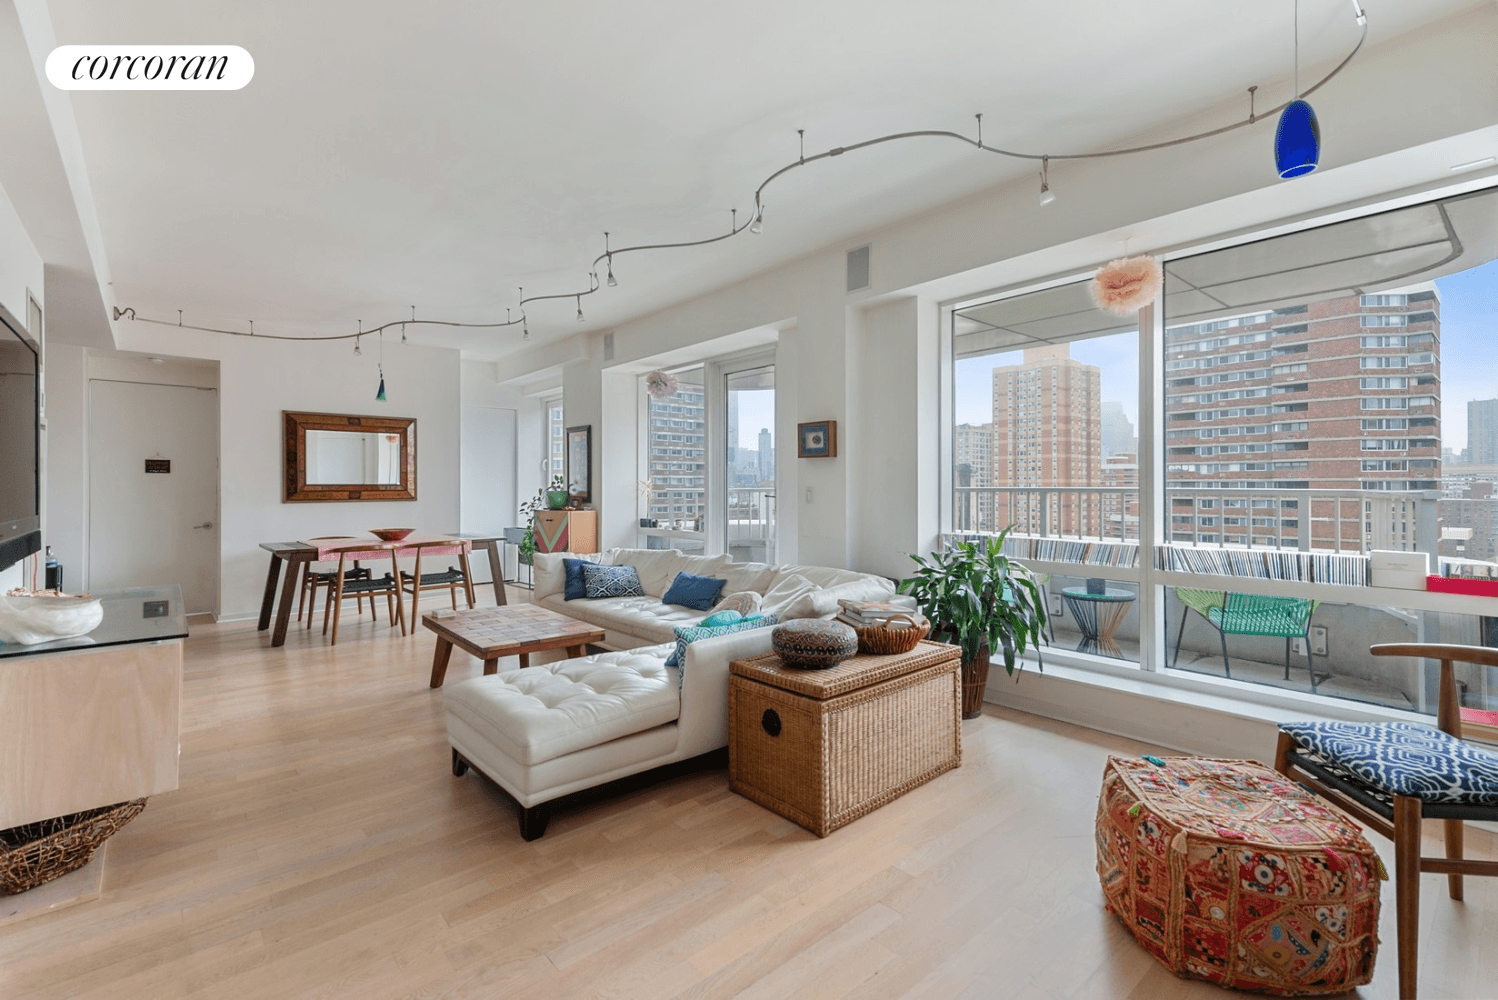 This 2 bedroom, 2. 5 bath penthouse is the ultimate in luxury living and offers spectacular sweeping views of the Empire State and Chrysler Buildings from the apartment's private 20' ...